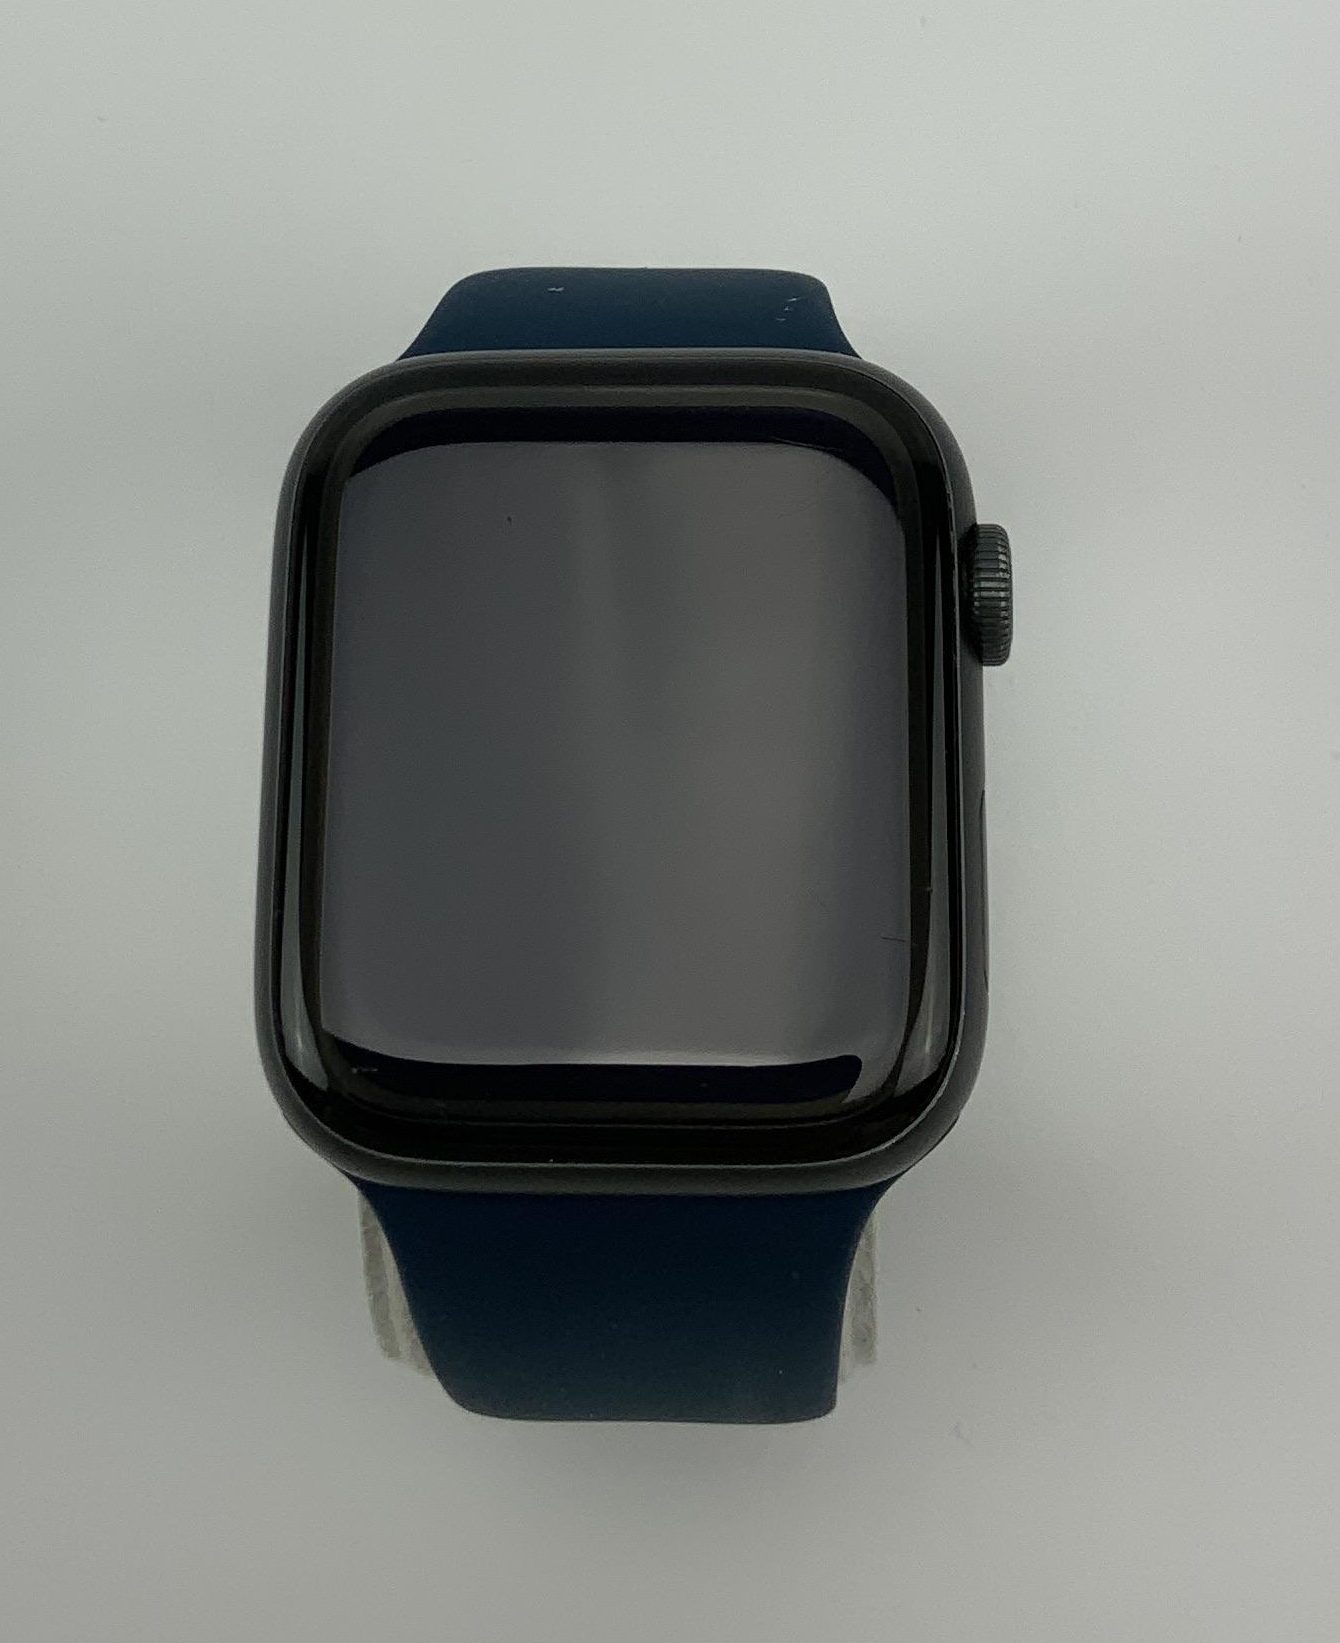 Watch Series 5 Aluminum (44mm), Space Gray, image 1